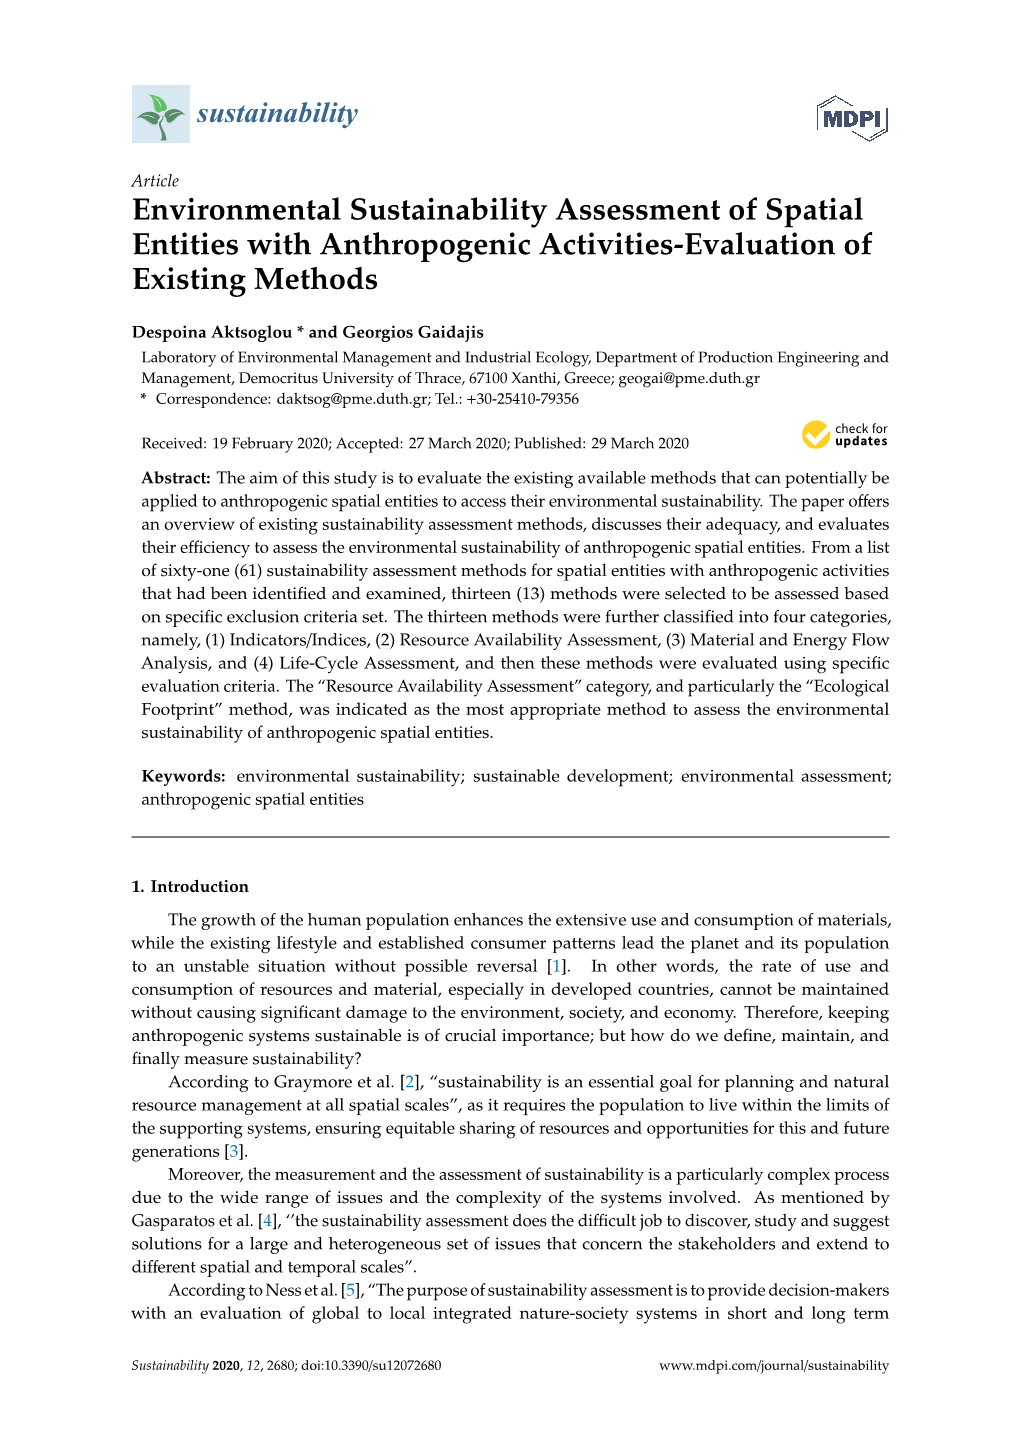 Environmental Sustainability Assessment of Spatial Entities with Anthropogenic Activities-Evaluation of Existing Methods